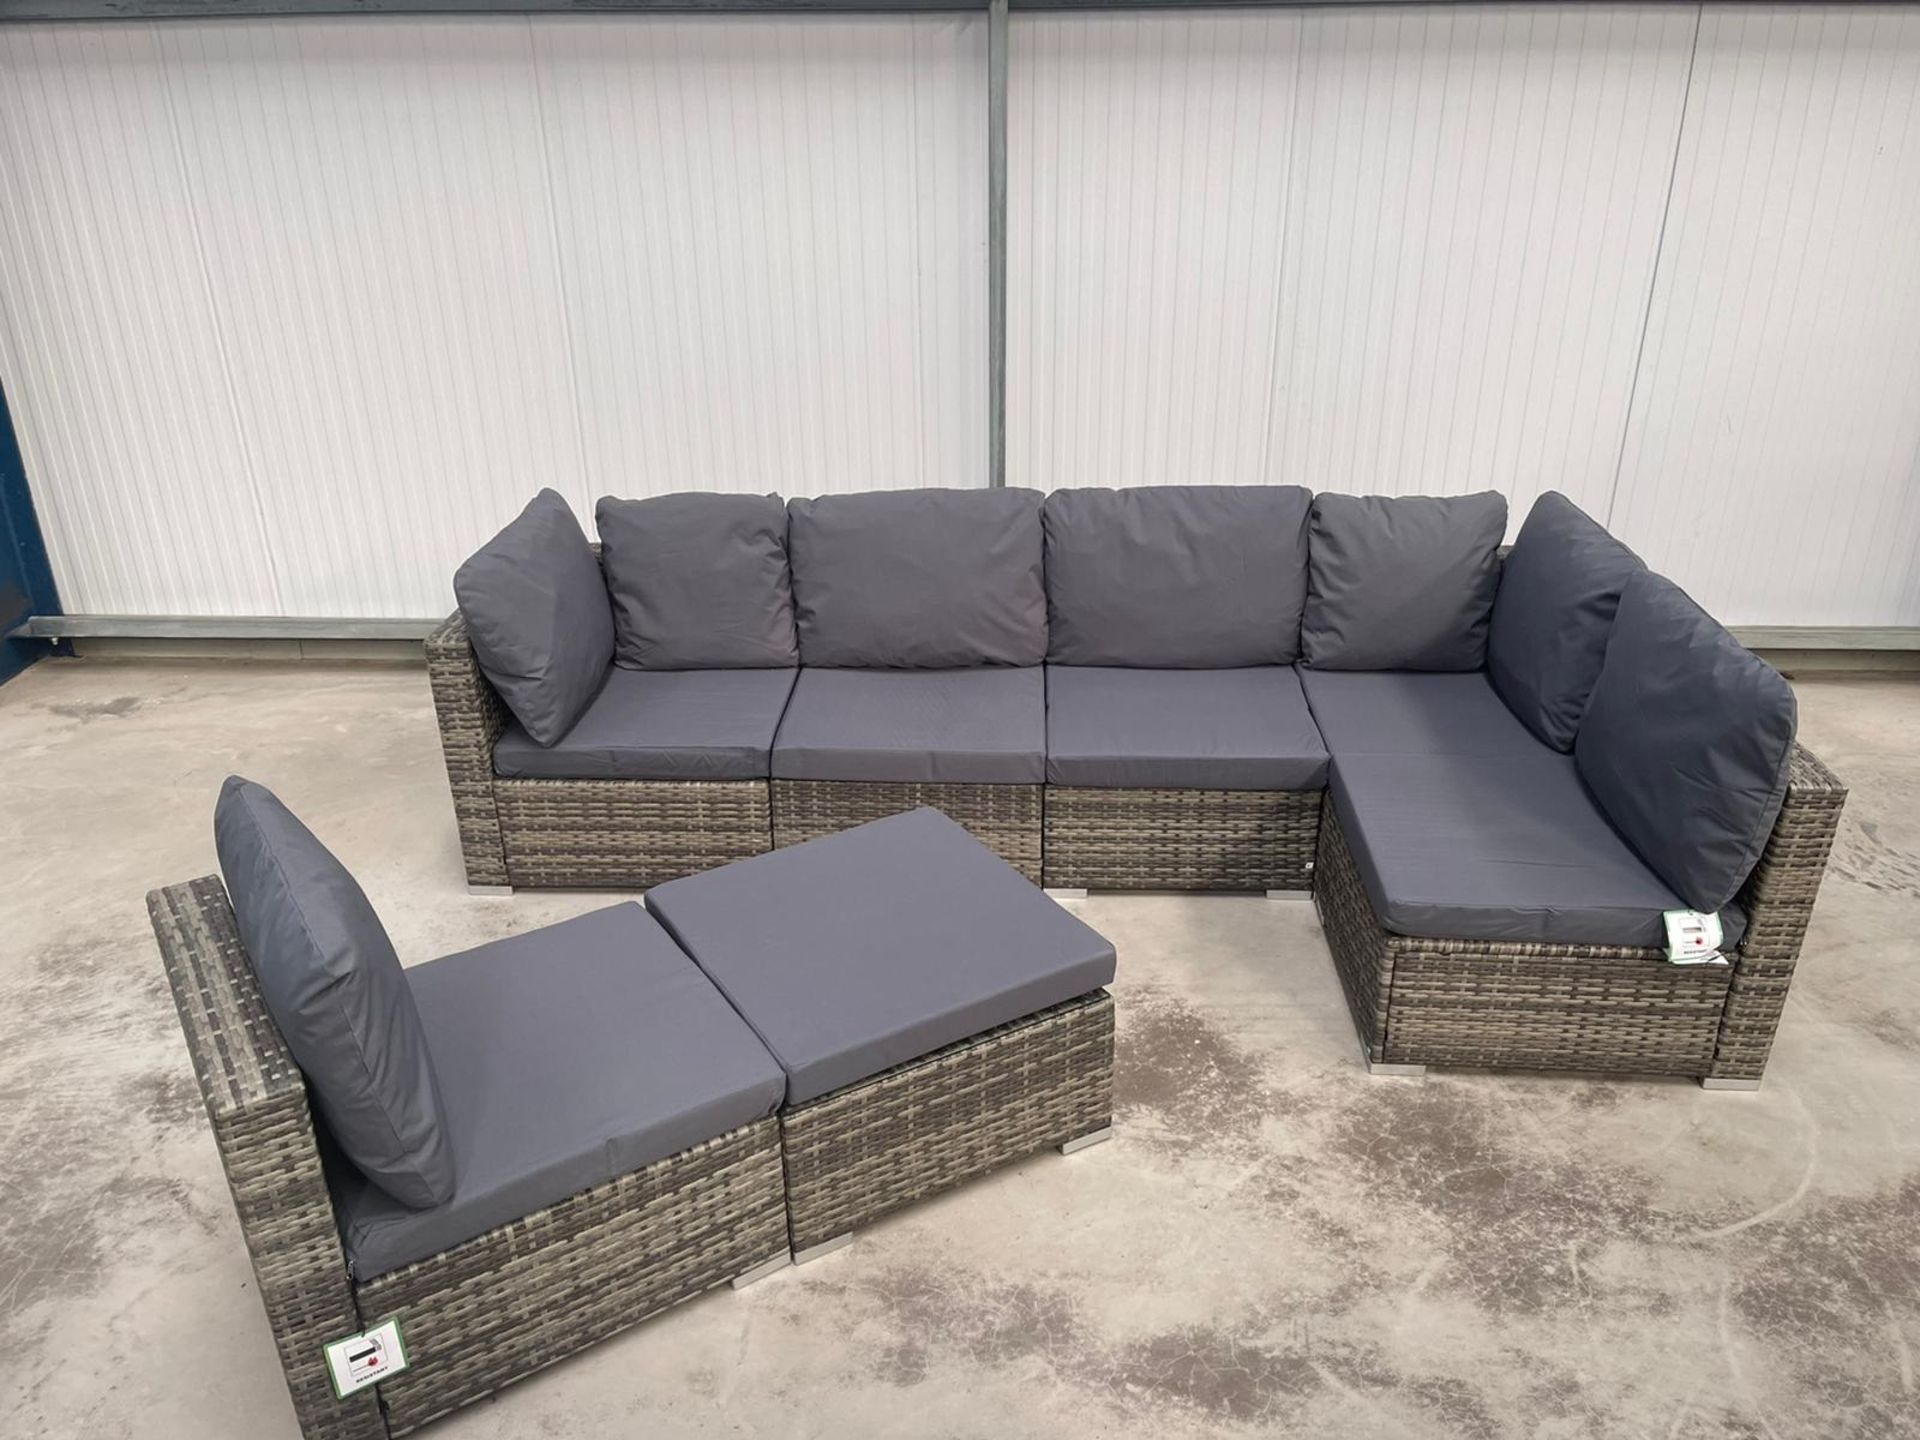 RRP £899 - NEW GREY U-SHAPED MODULAR SOFA WITH GLASS TOPPED COFFEE TABLE. VERY VERSITILE SET THAT - Image 3 of 9